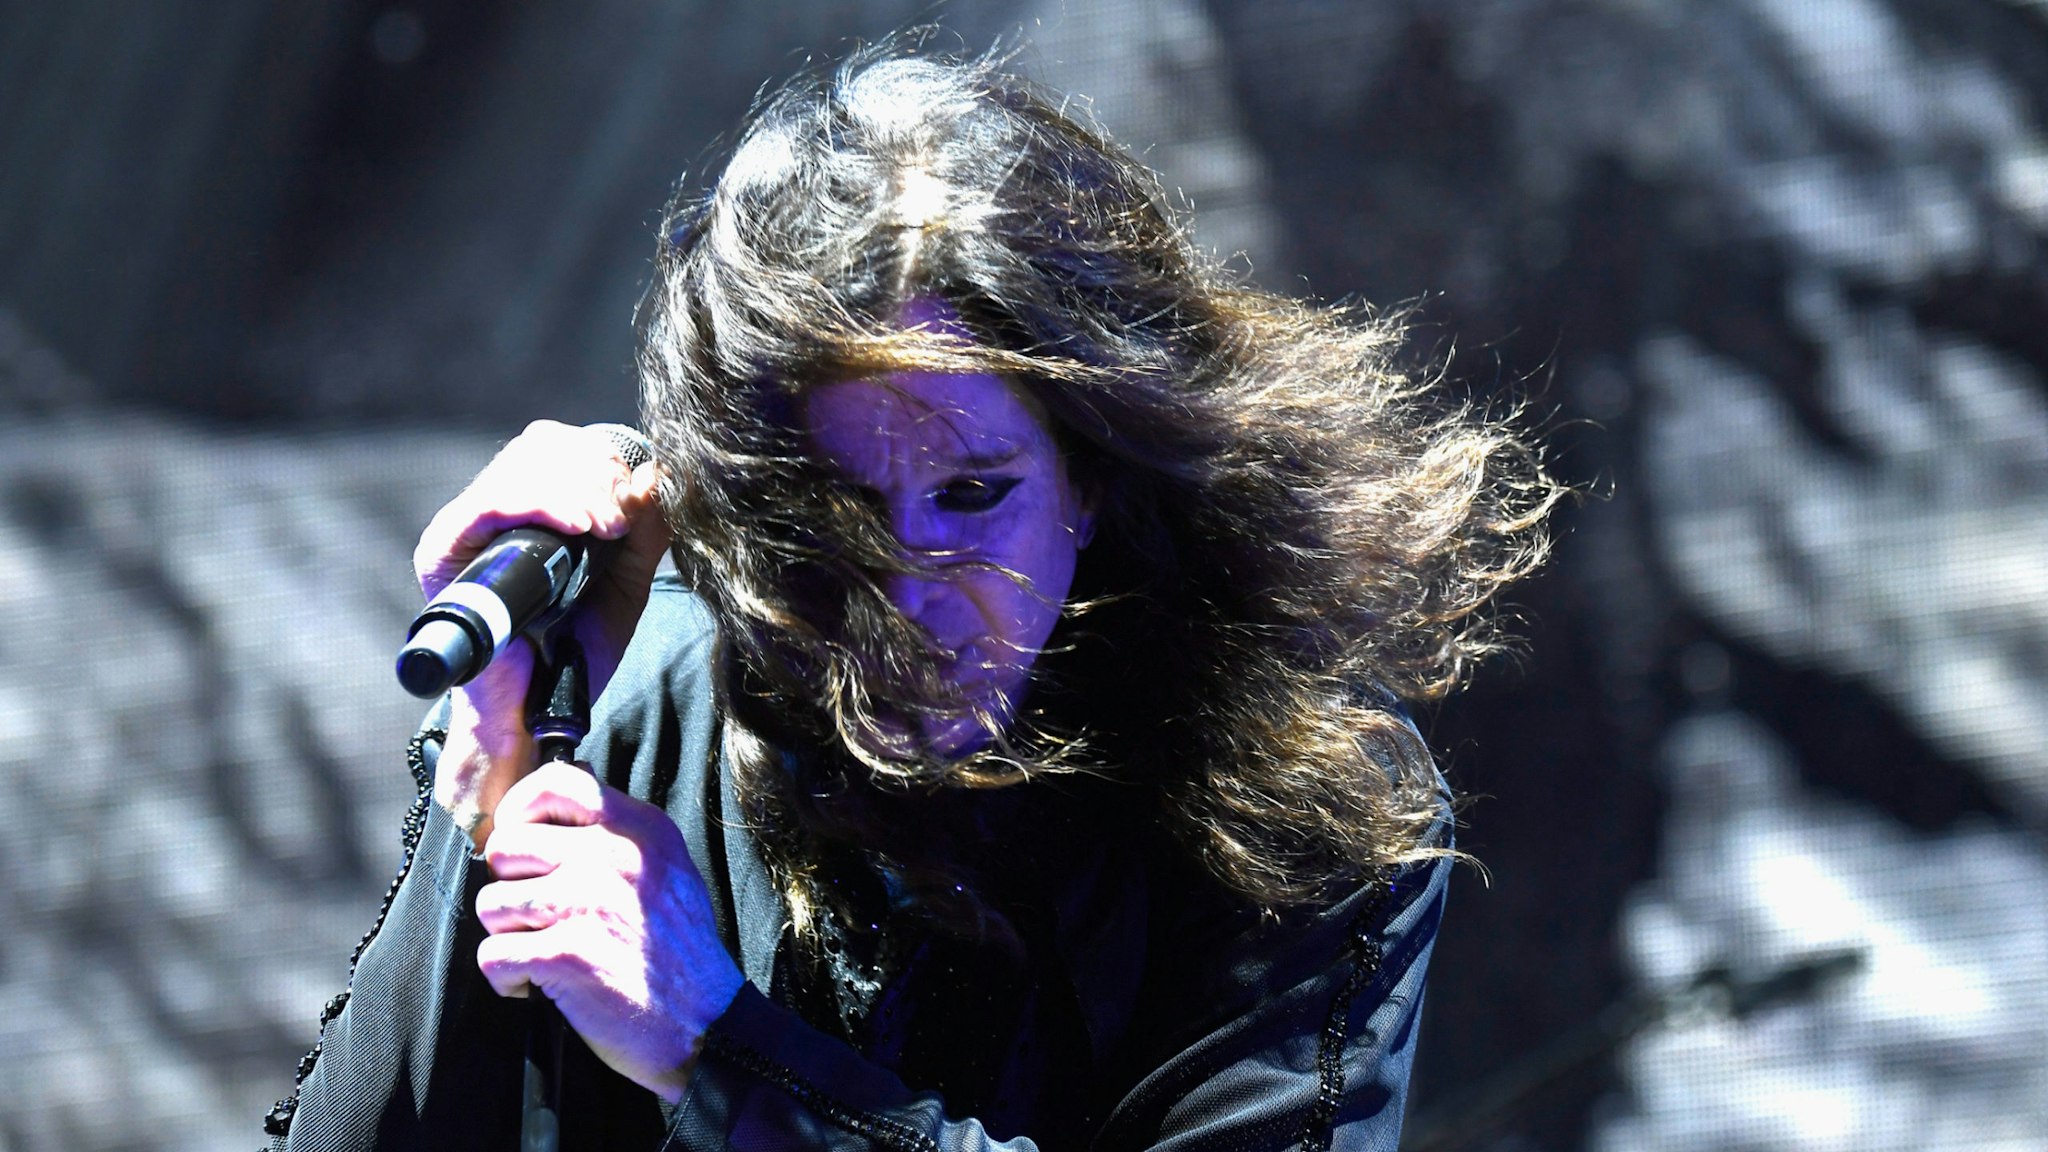 Ozzy Osbourne of Black Sabbath performs at Ozzfest 2016 at San Manuel Amphitheater on September 24, 2016 in Los Angeles, California.